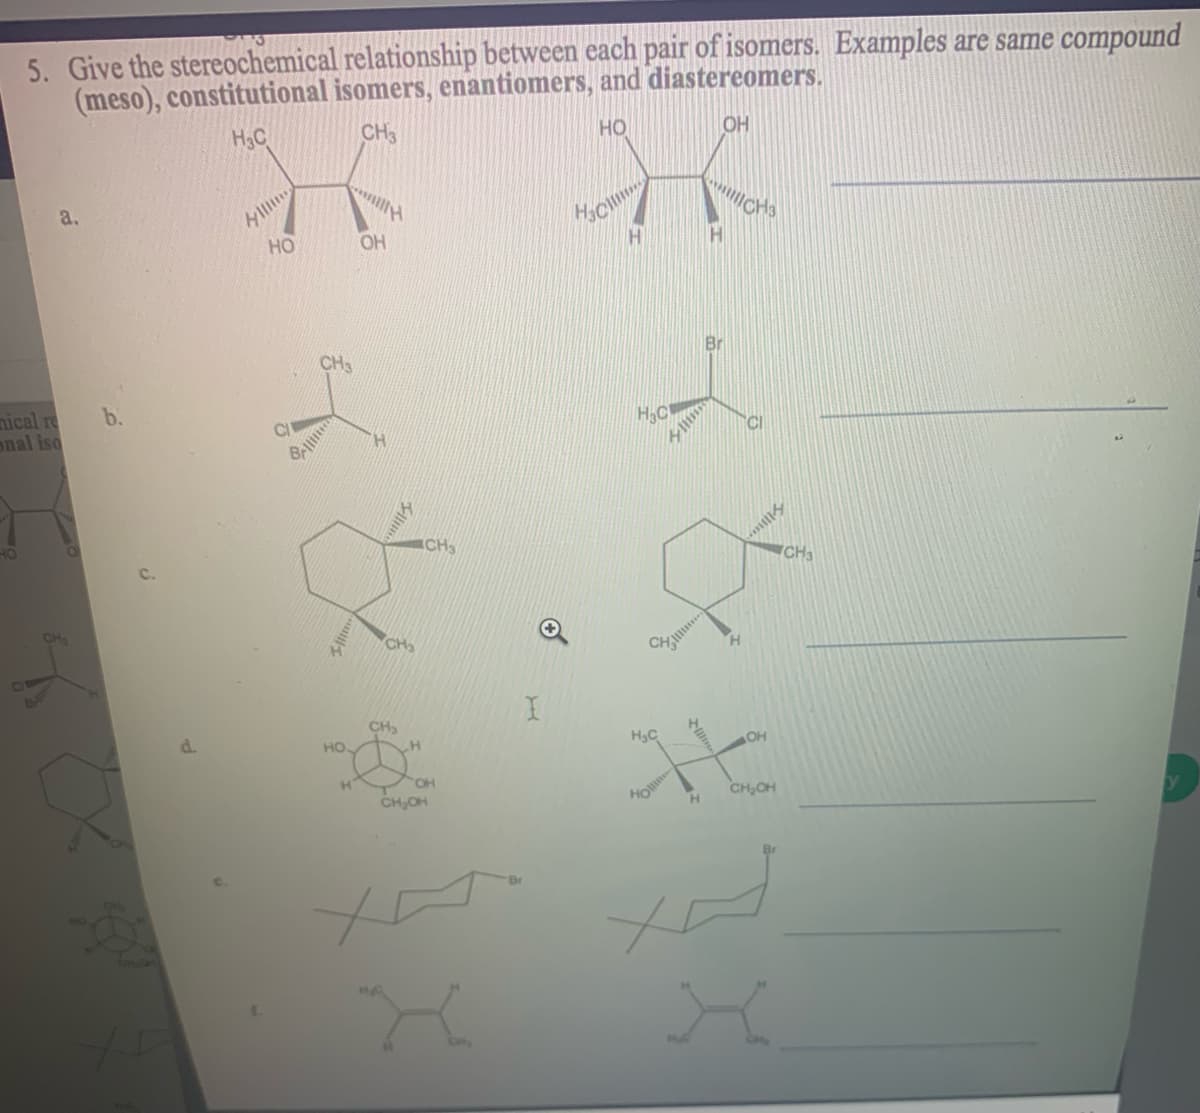 5. Give the stereochemical relationship between each pair of isomers. Examples are same compound
(meso), constitutional isomers, enantiomers, and diastereomers.
OH
H3C
CH3
но
a.
HO
OH
Br
b.
H,C
nical re
onal iso
CI
CH
d.
HO
CH,OH
